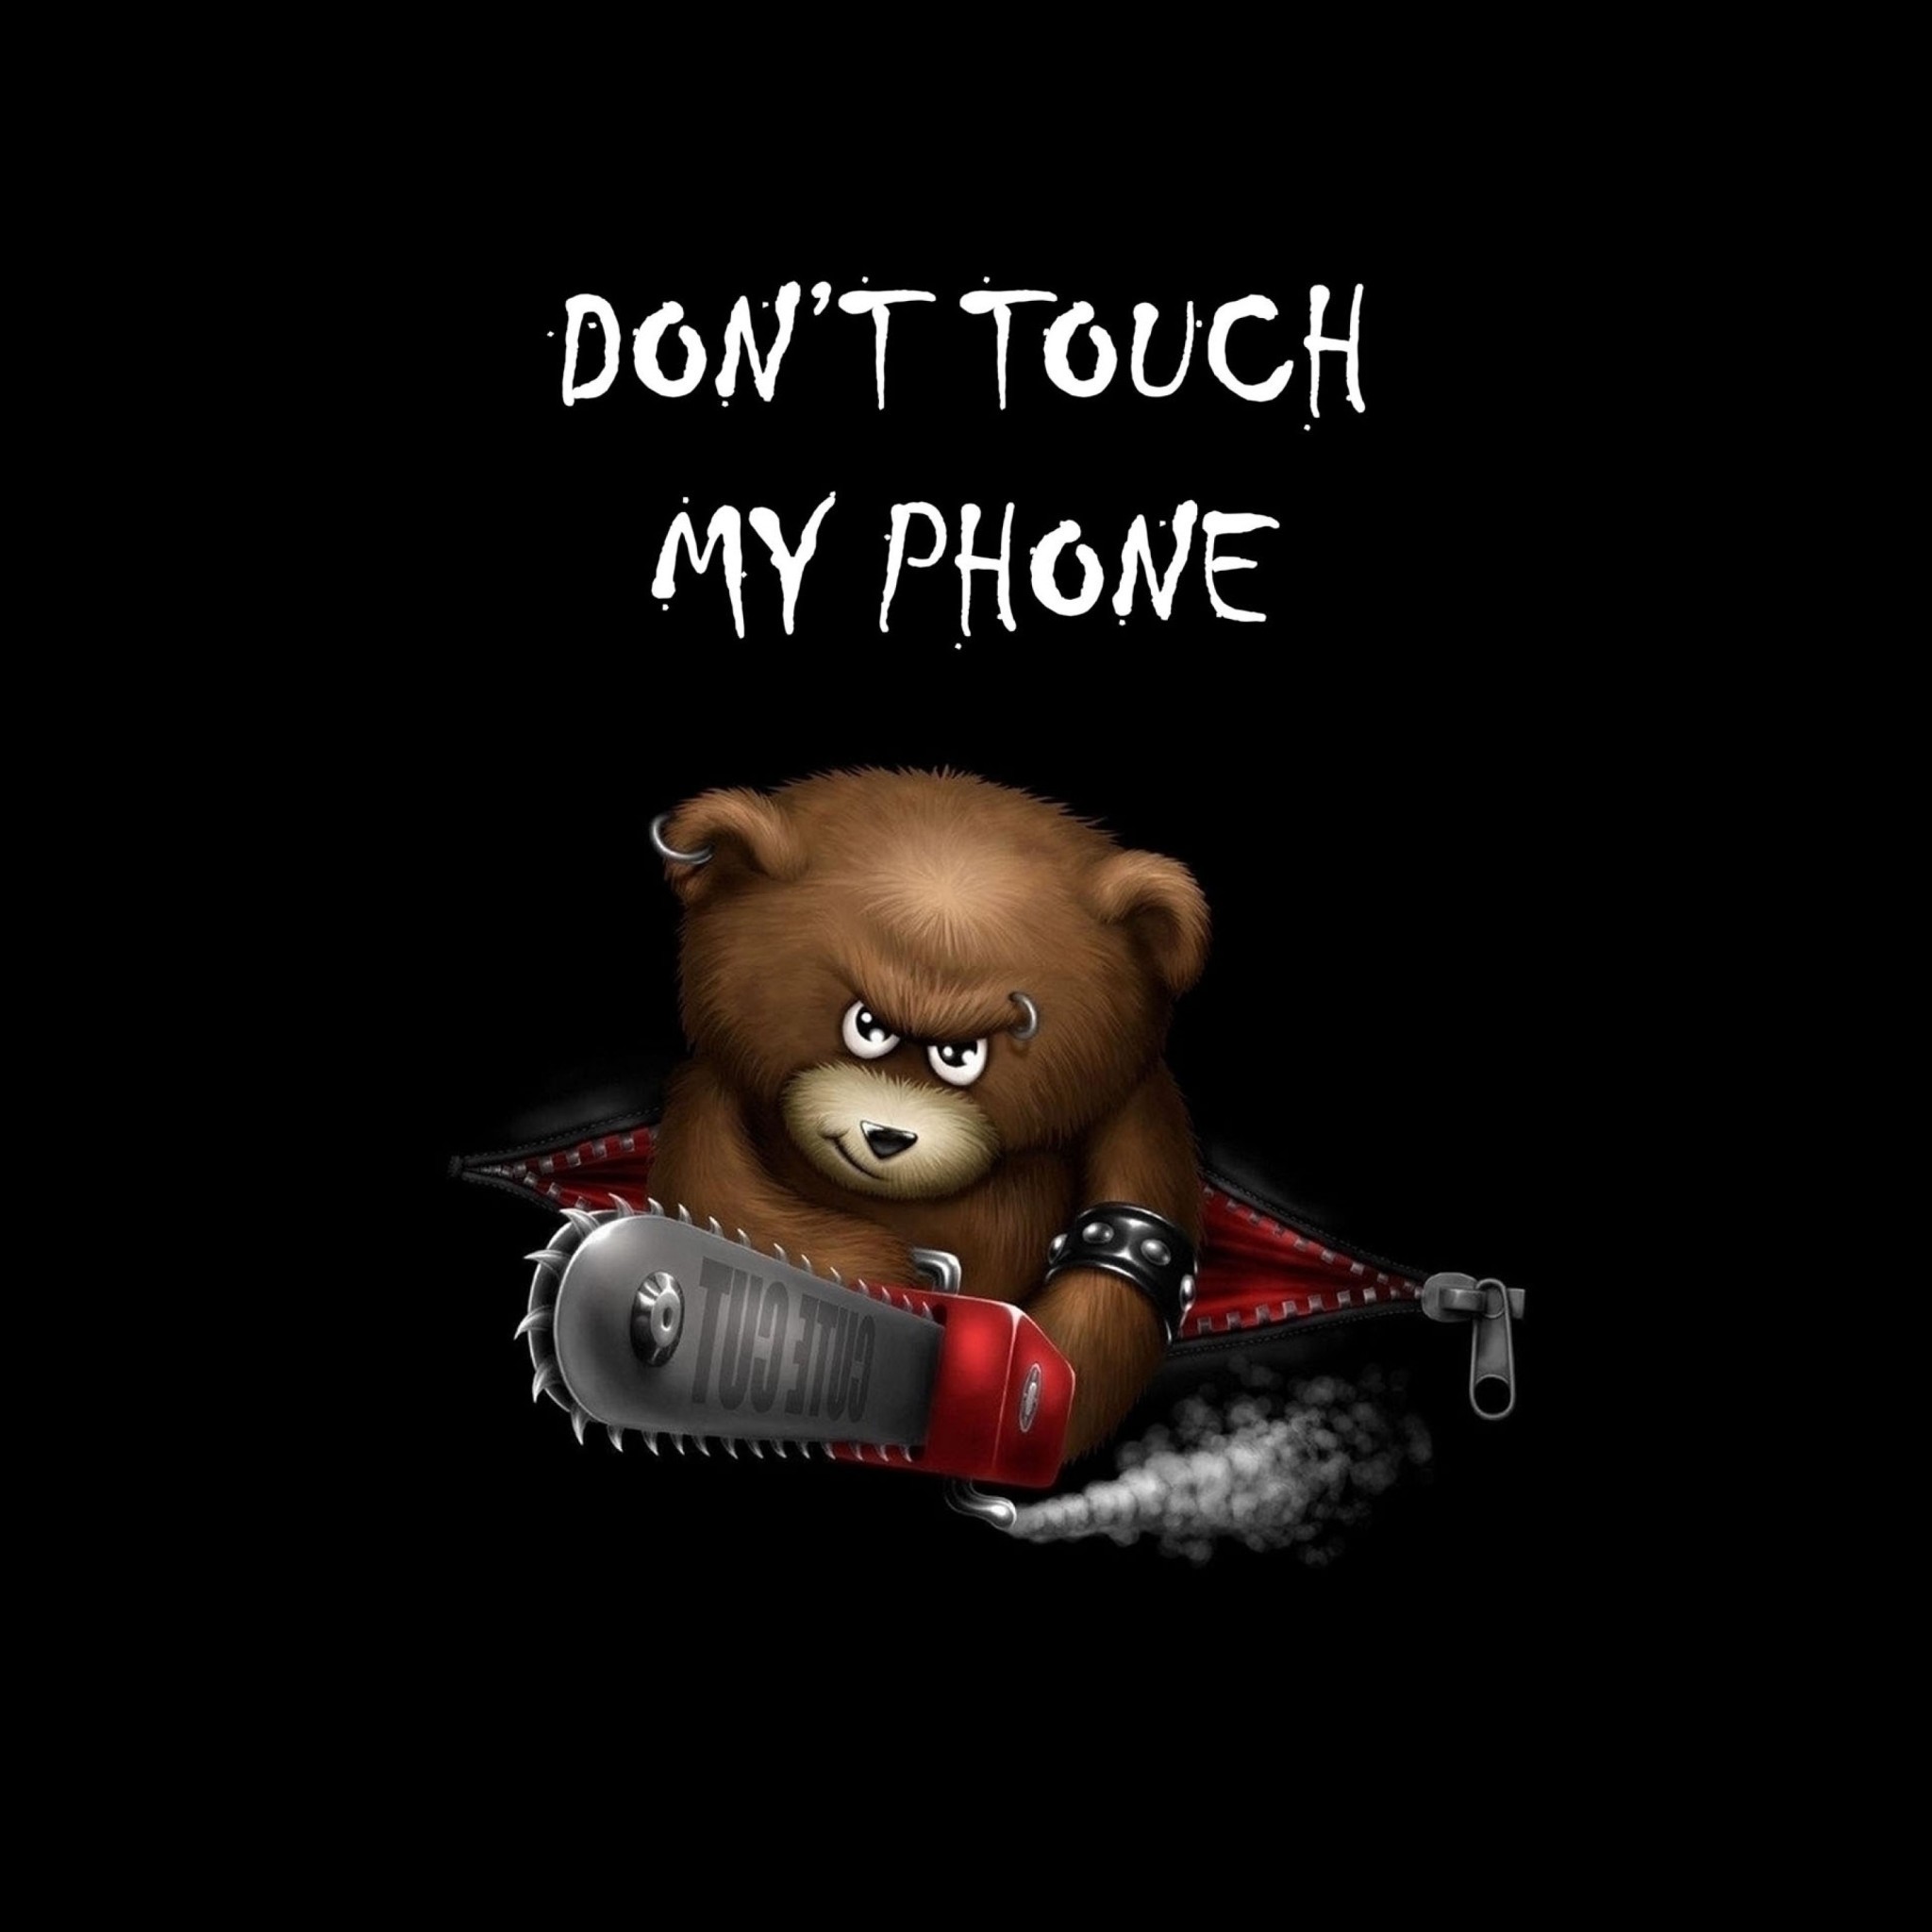 Wallpaper Dont Touch My Phone (72+ images)